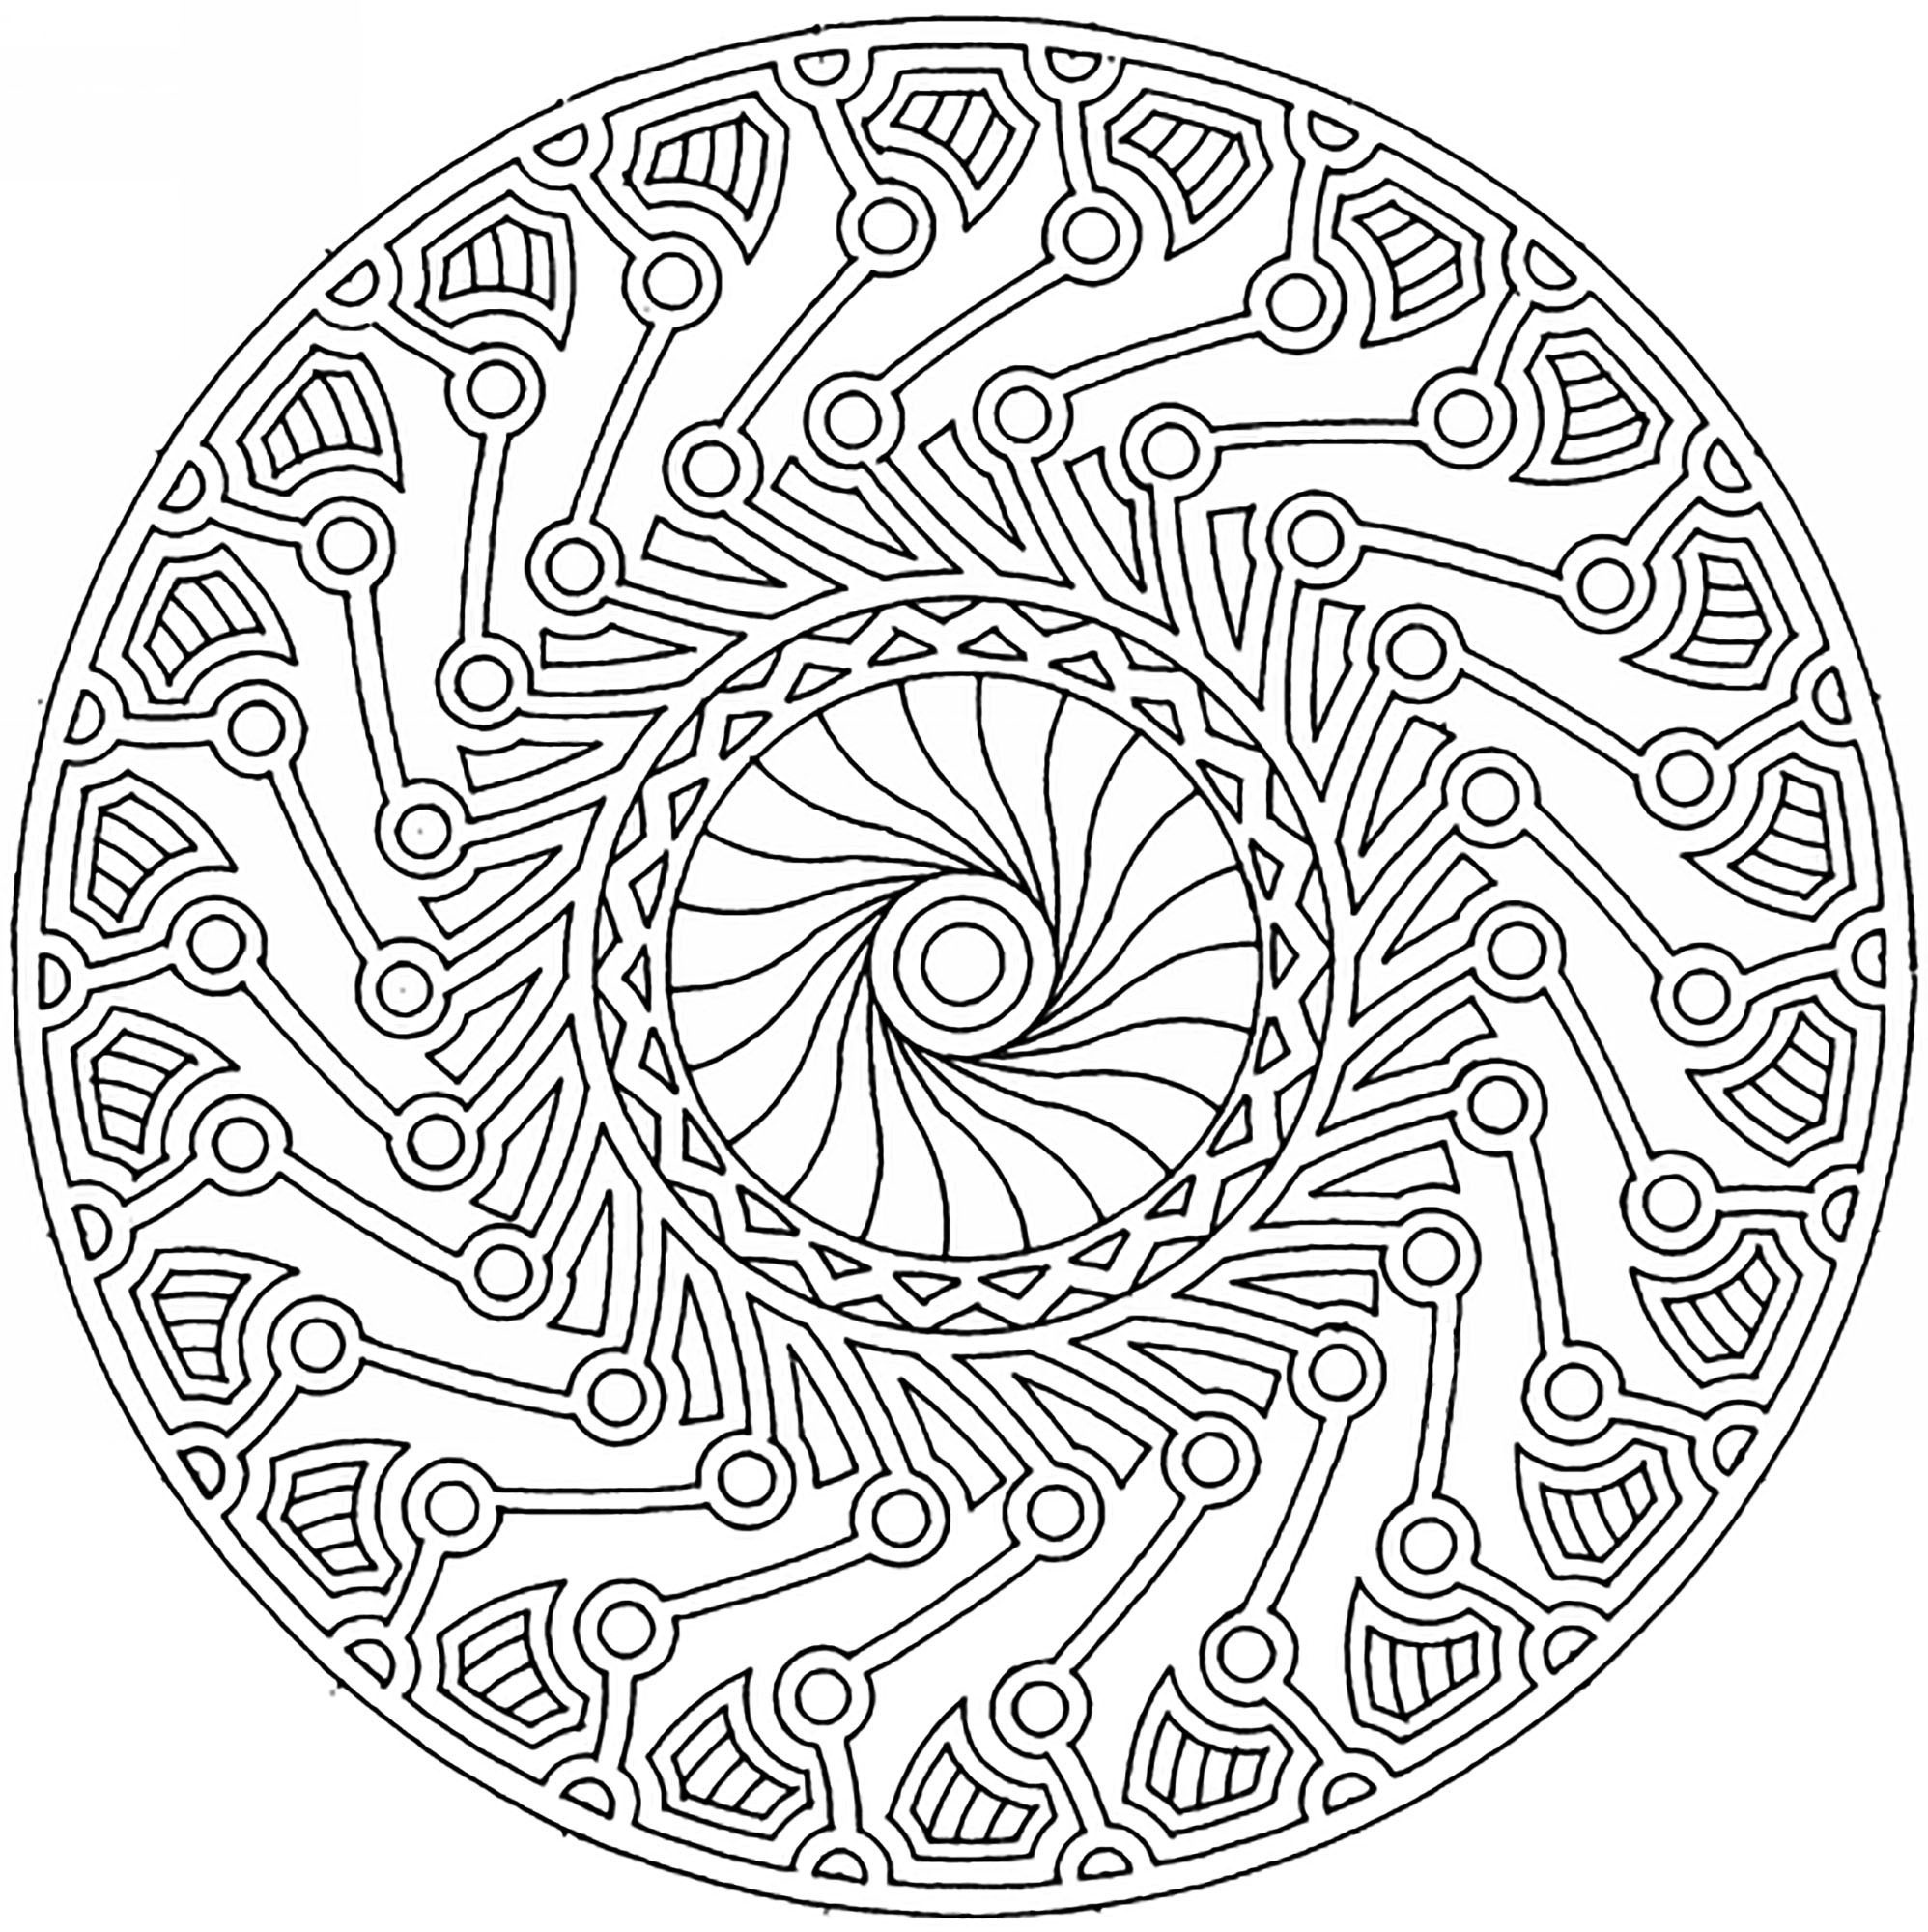 Mandala Harmony And Complexity - M&amp;amp;alas Adult Coloring Pages - Free Printable Mandala Patterns